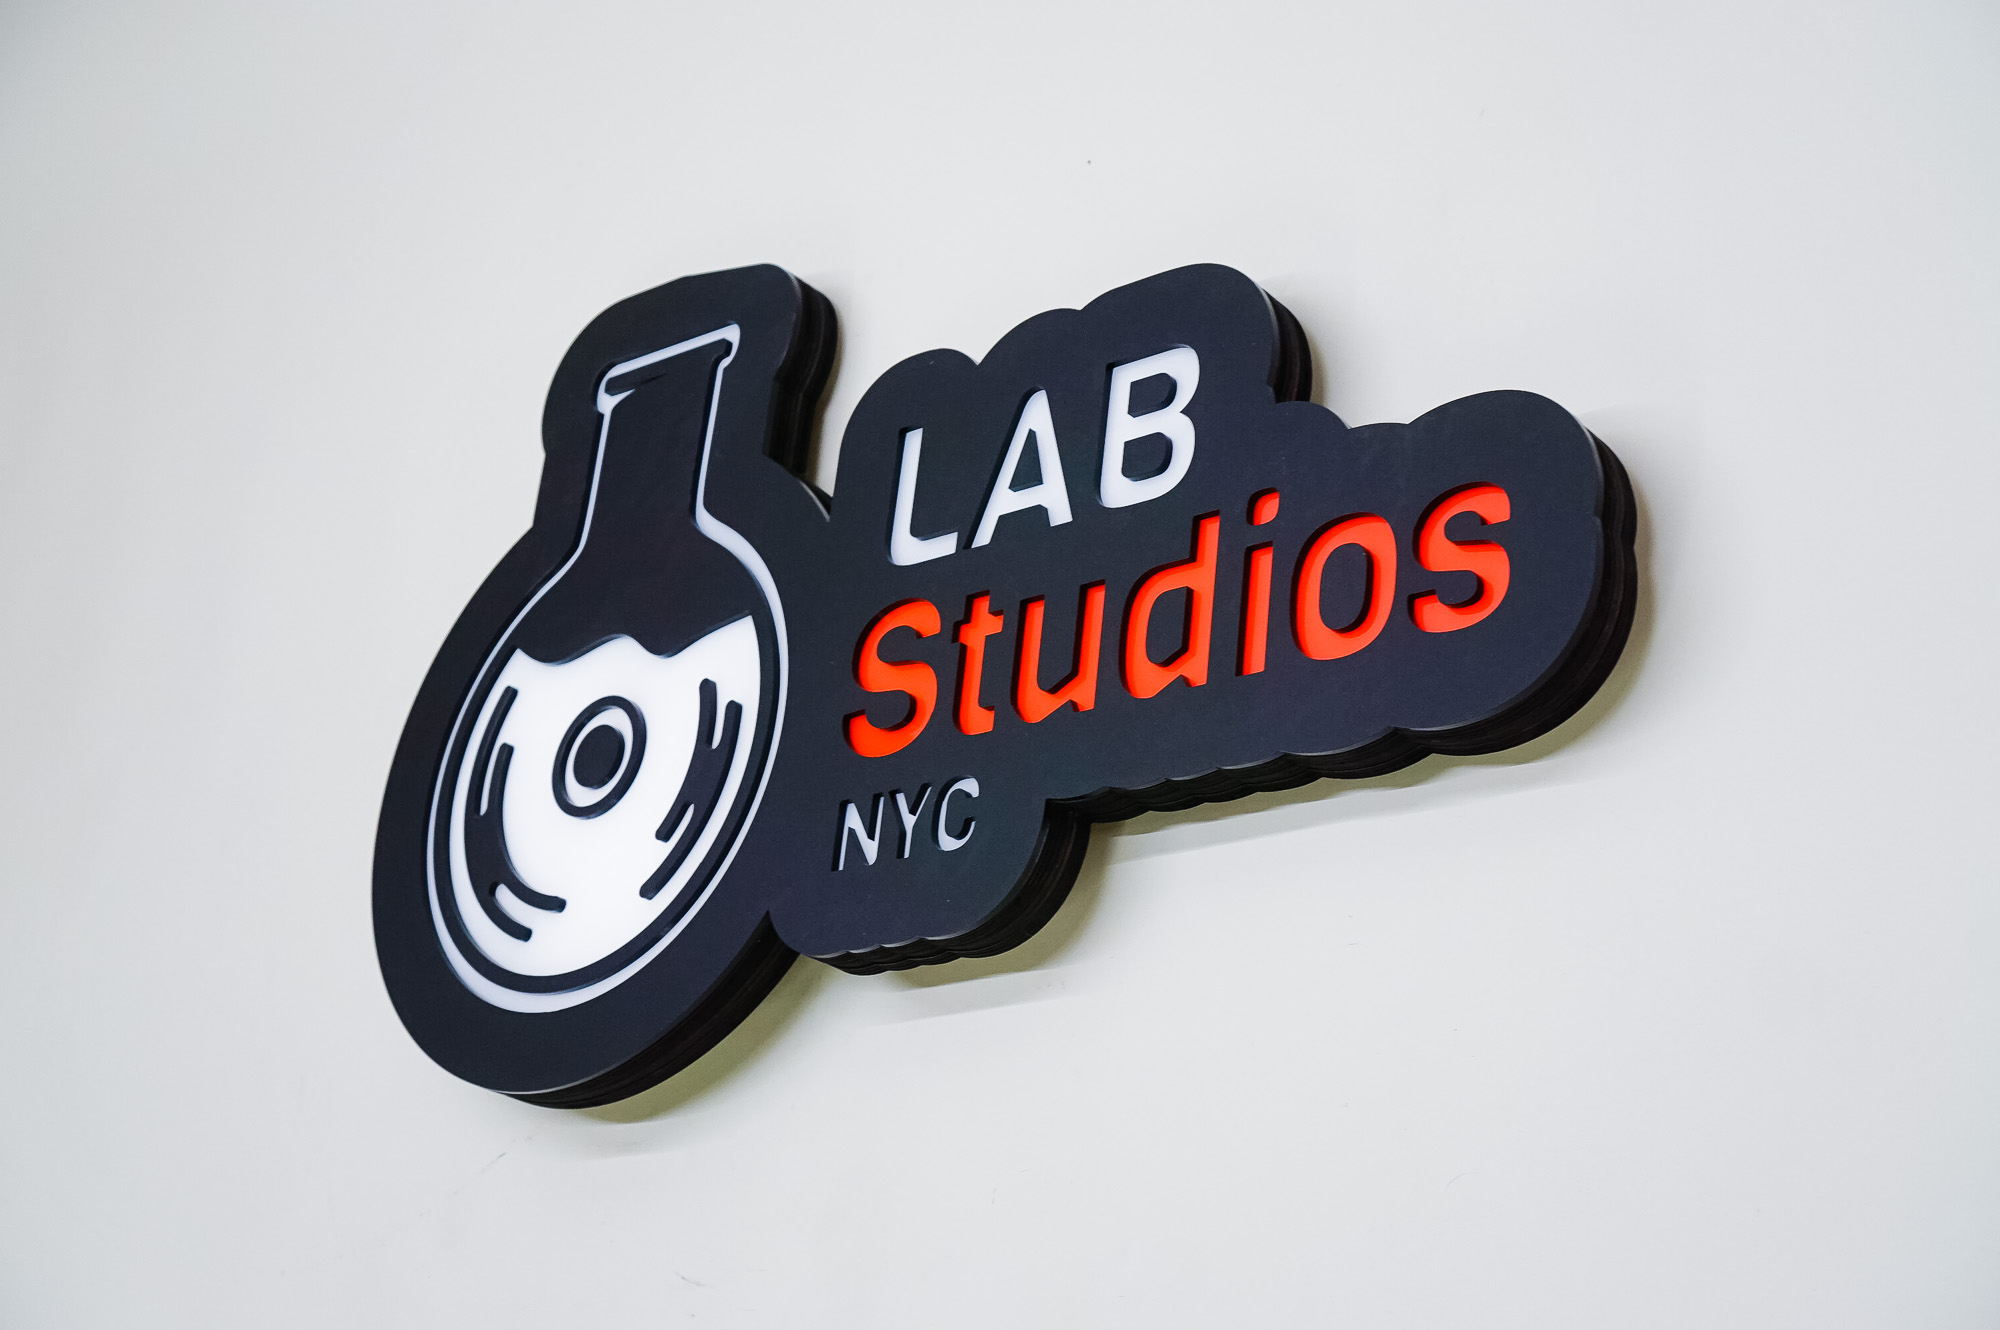 Illuminated pink, white, and black lightbox sign for Lab Studios, a recording studio in New York City.